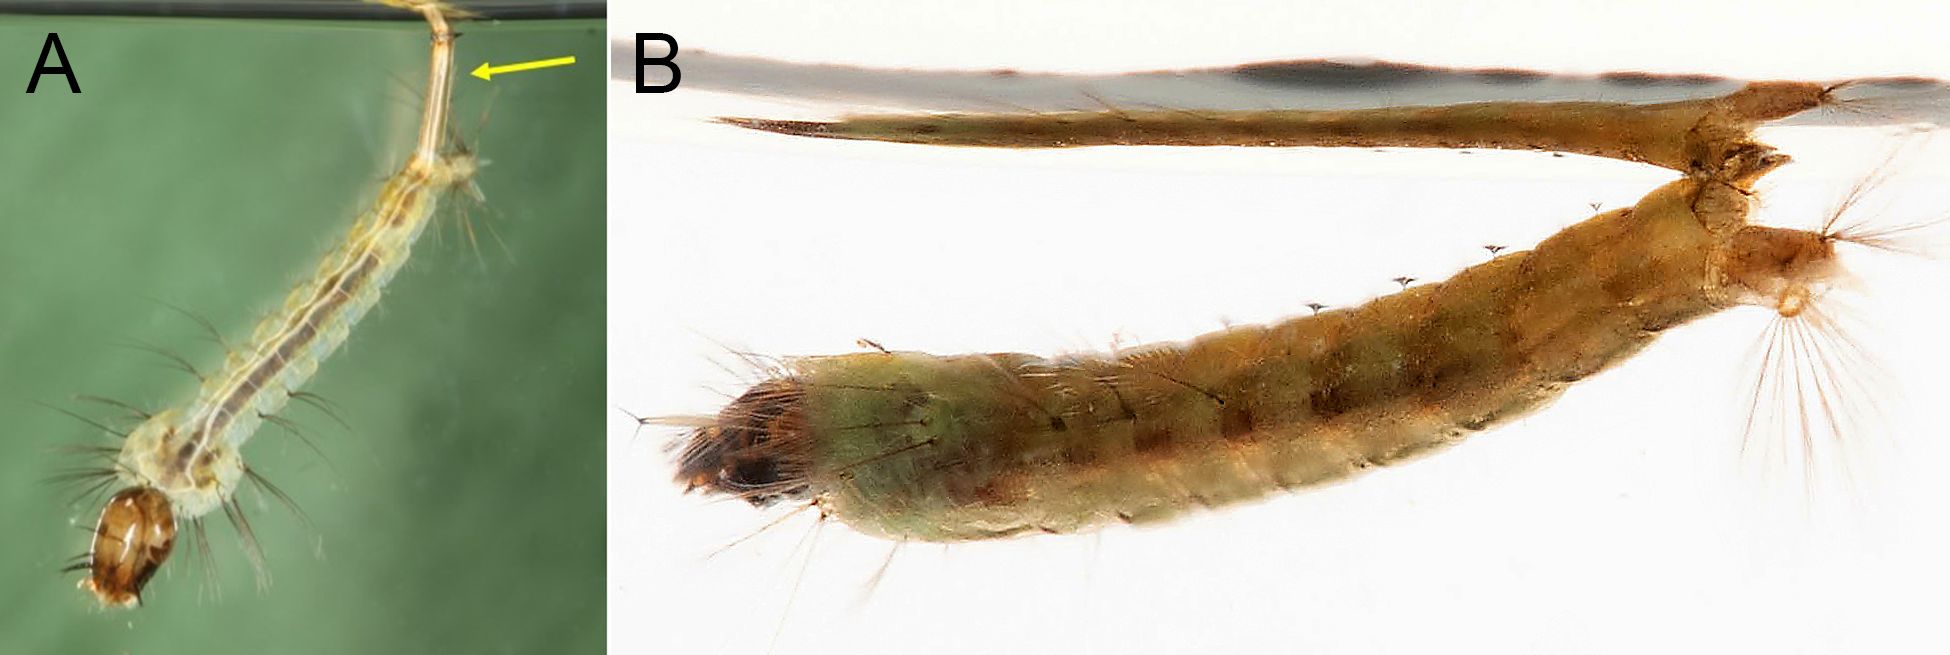 Larva of Uranotaenia sapphirina Osten Sacken (A) with arrow pointing to siphon. Credit: Nathan Burkett-Cadena, UF/IFAS. Compare with larva of Anopheles crucians Wiedemann (B). Both Uranotaenia and Anopheles species larvae may rest nearly parallel to the surface of the water, but the genera can be distinguished by the presence of a siphon (yellow arrow) in Uranotaenia larvae, and the absence of this structure in Anopheles species larvae.